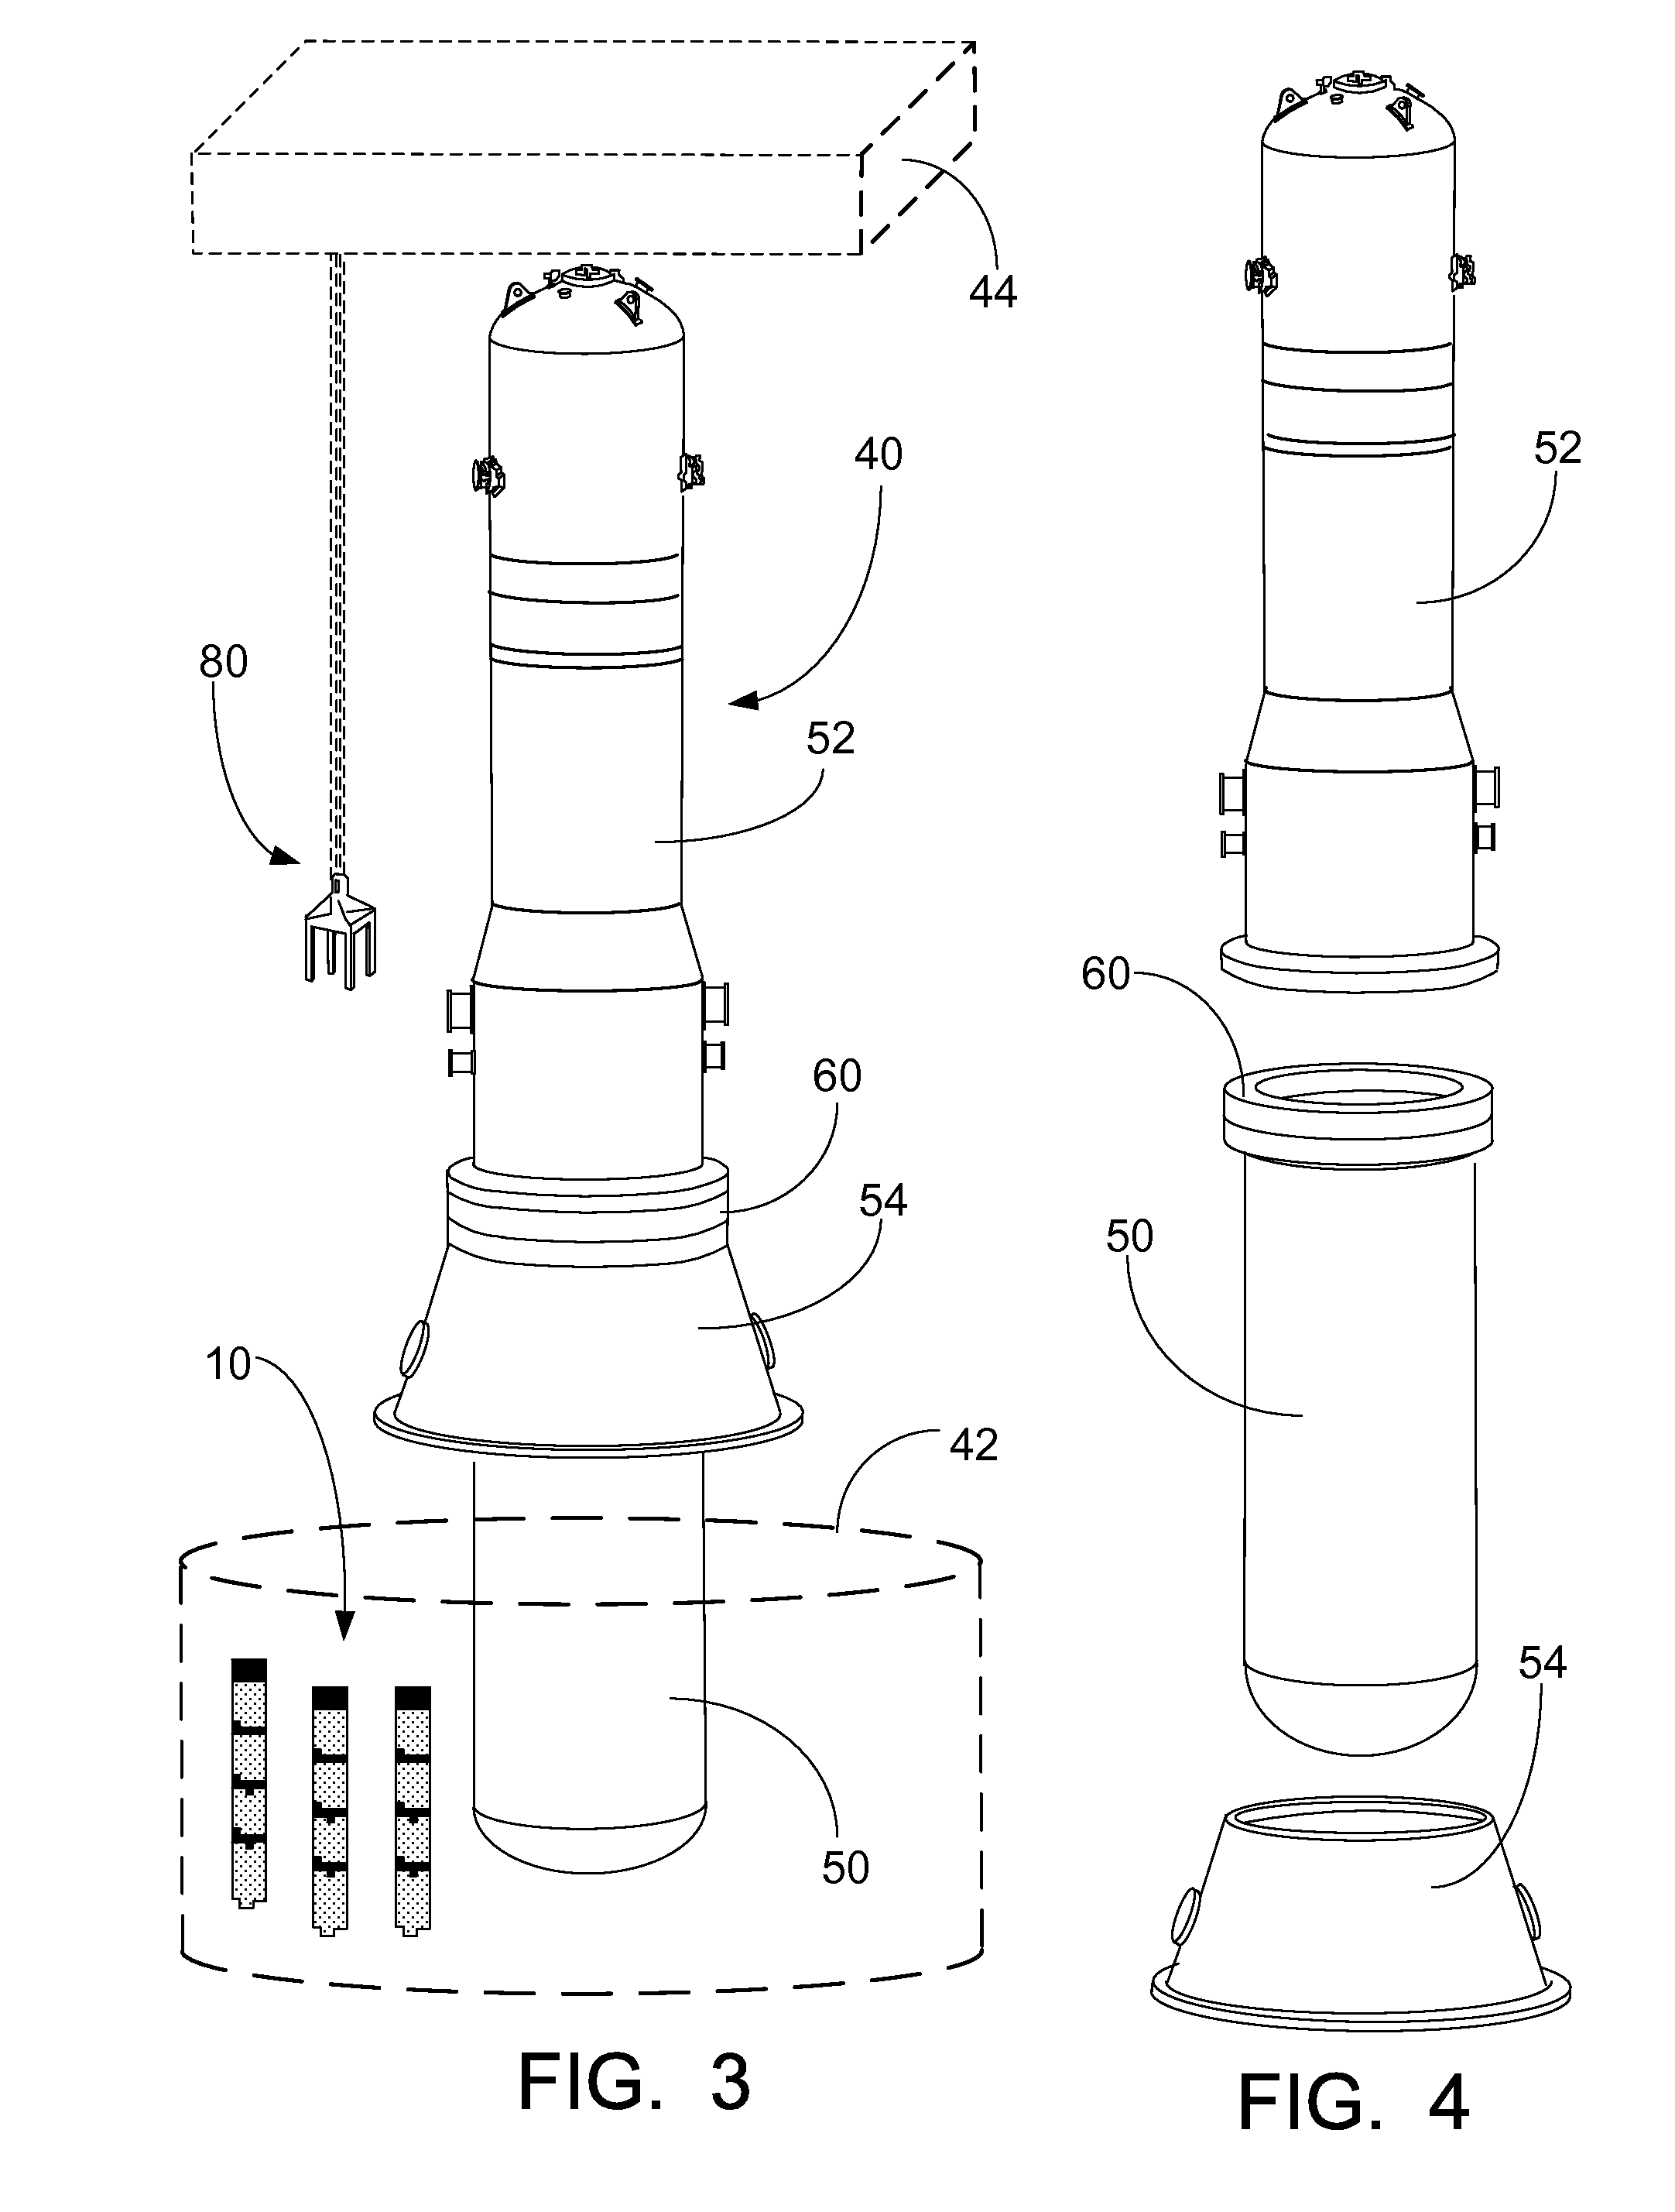 Nuclear reactor refueling methods and apparatuses